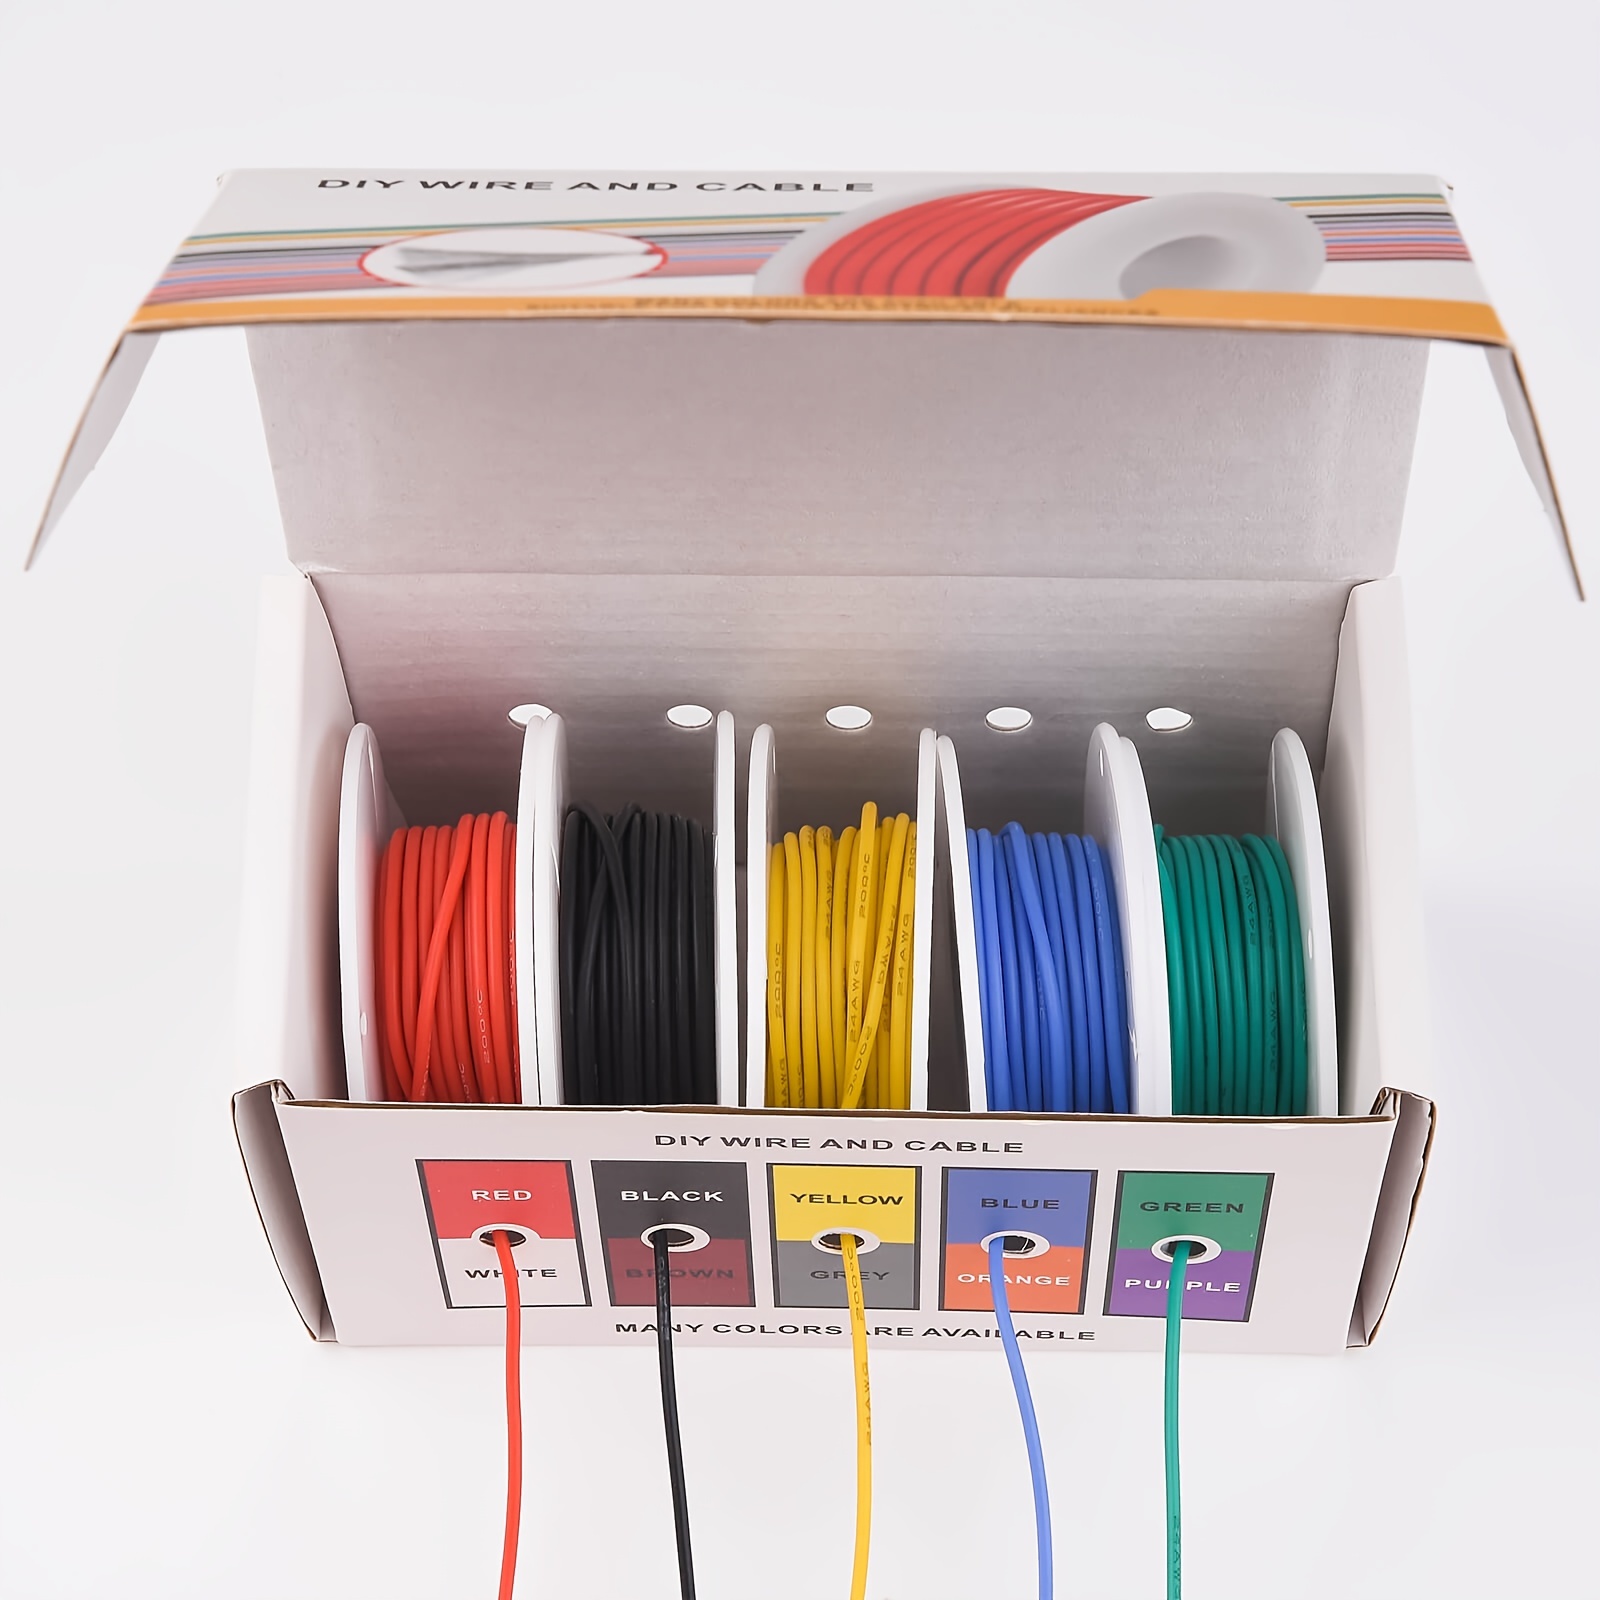 16 AWG Stranded Electrical Wire 16 Gauge Tinned Copper Wires Flexible  Silicone Electric Hook Up Wire Kit OD:2.5mm, 5 Colors 13.1ft/4m Each